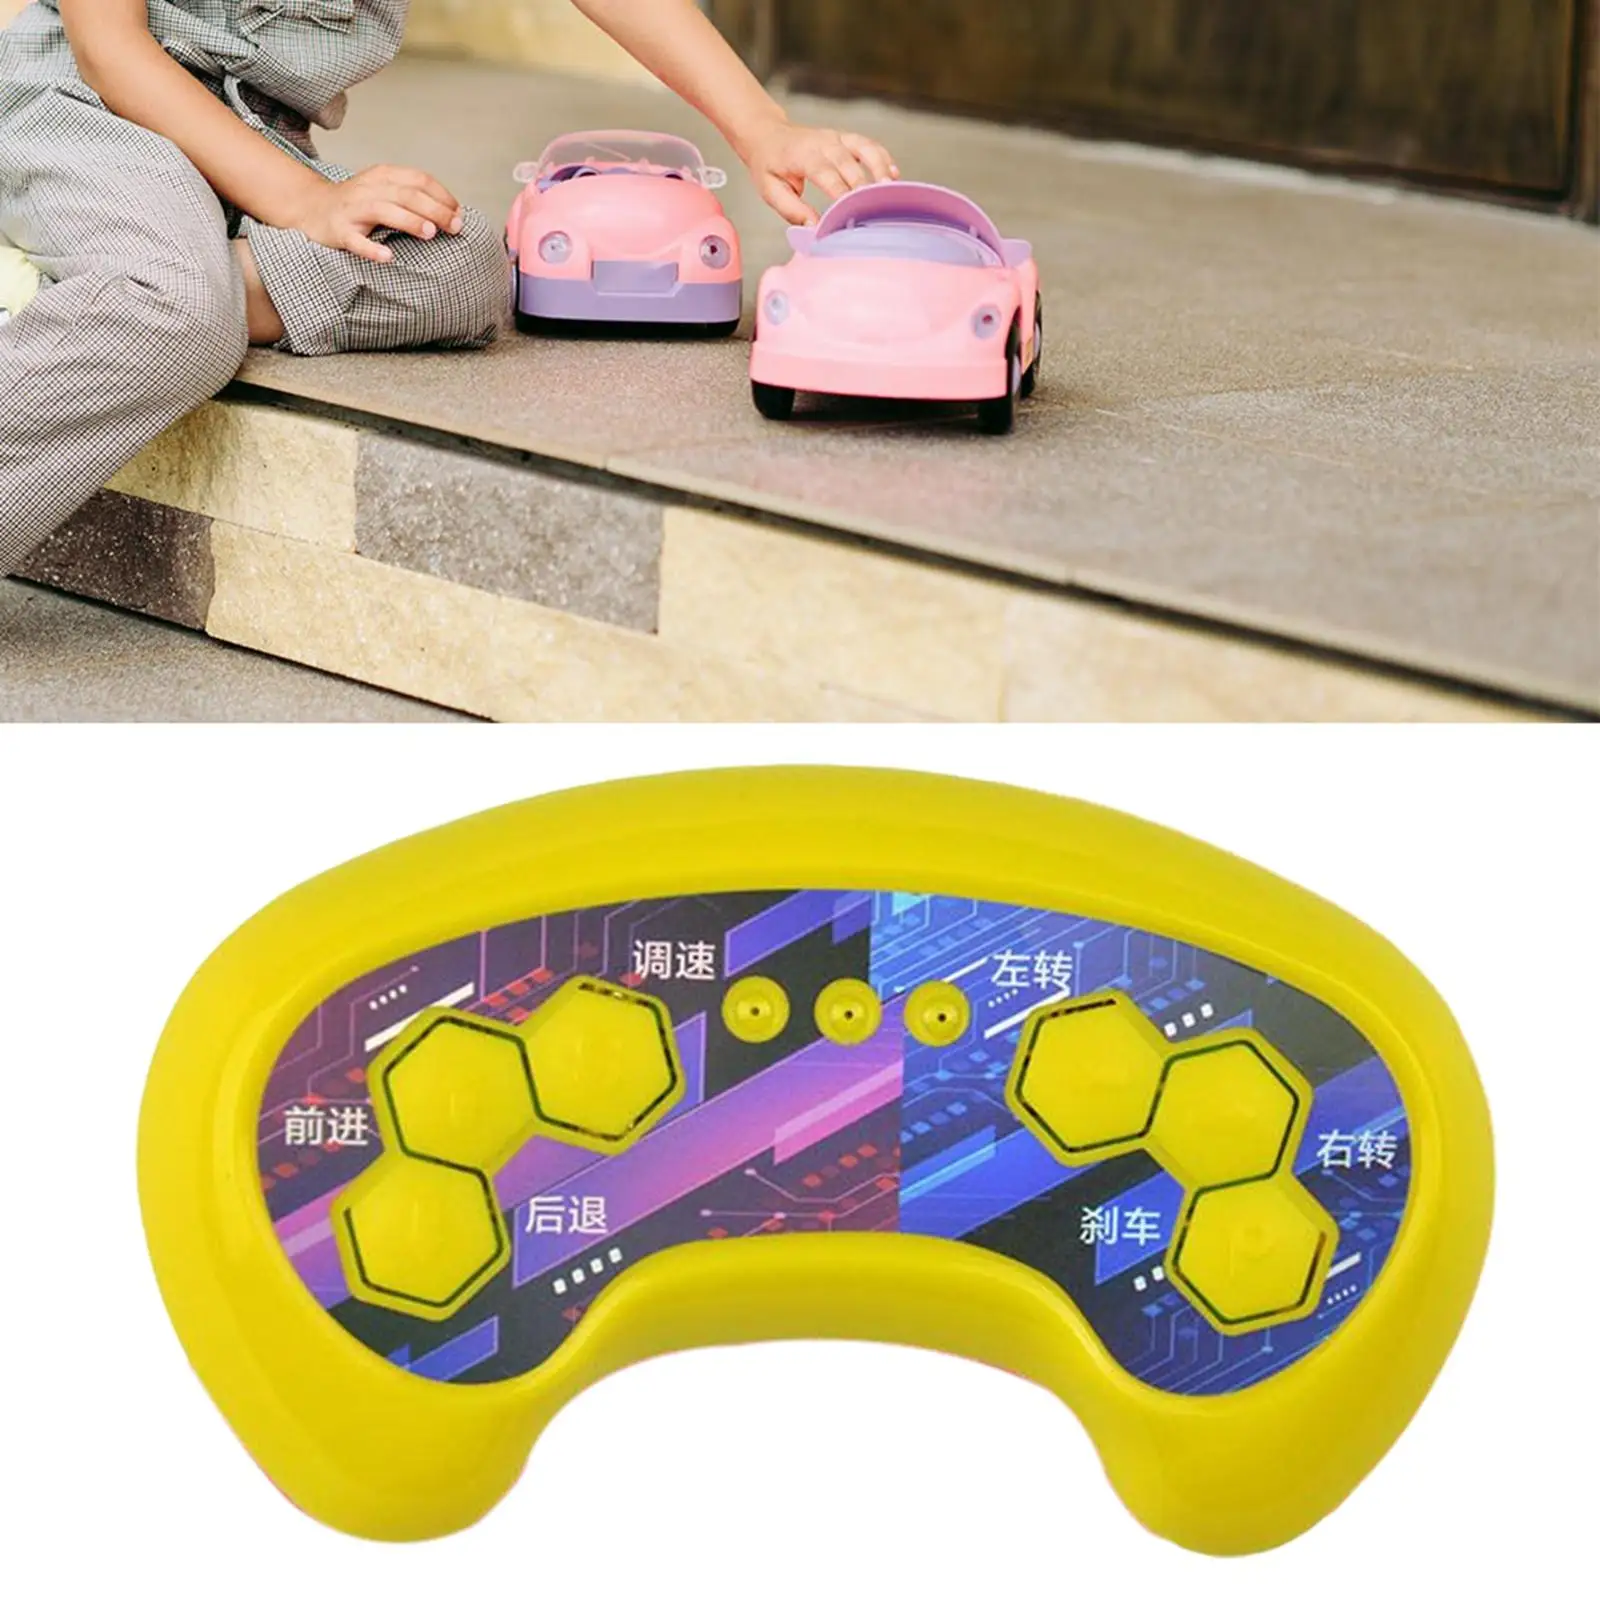 Remote Controller Kids Children Gift for Hh-Ph360K RC Electric Vehicles